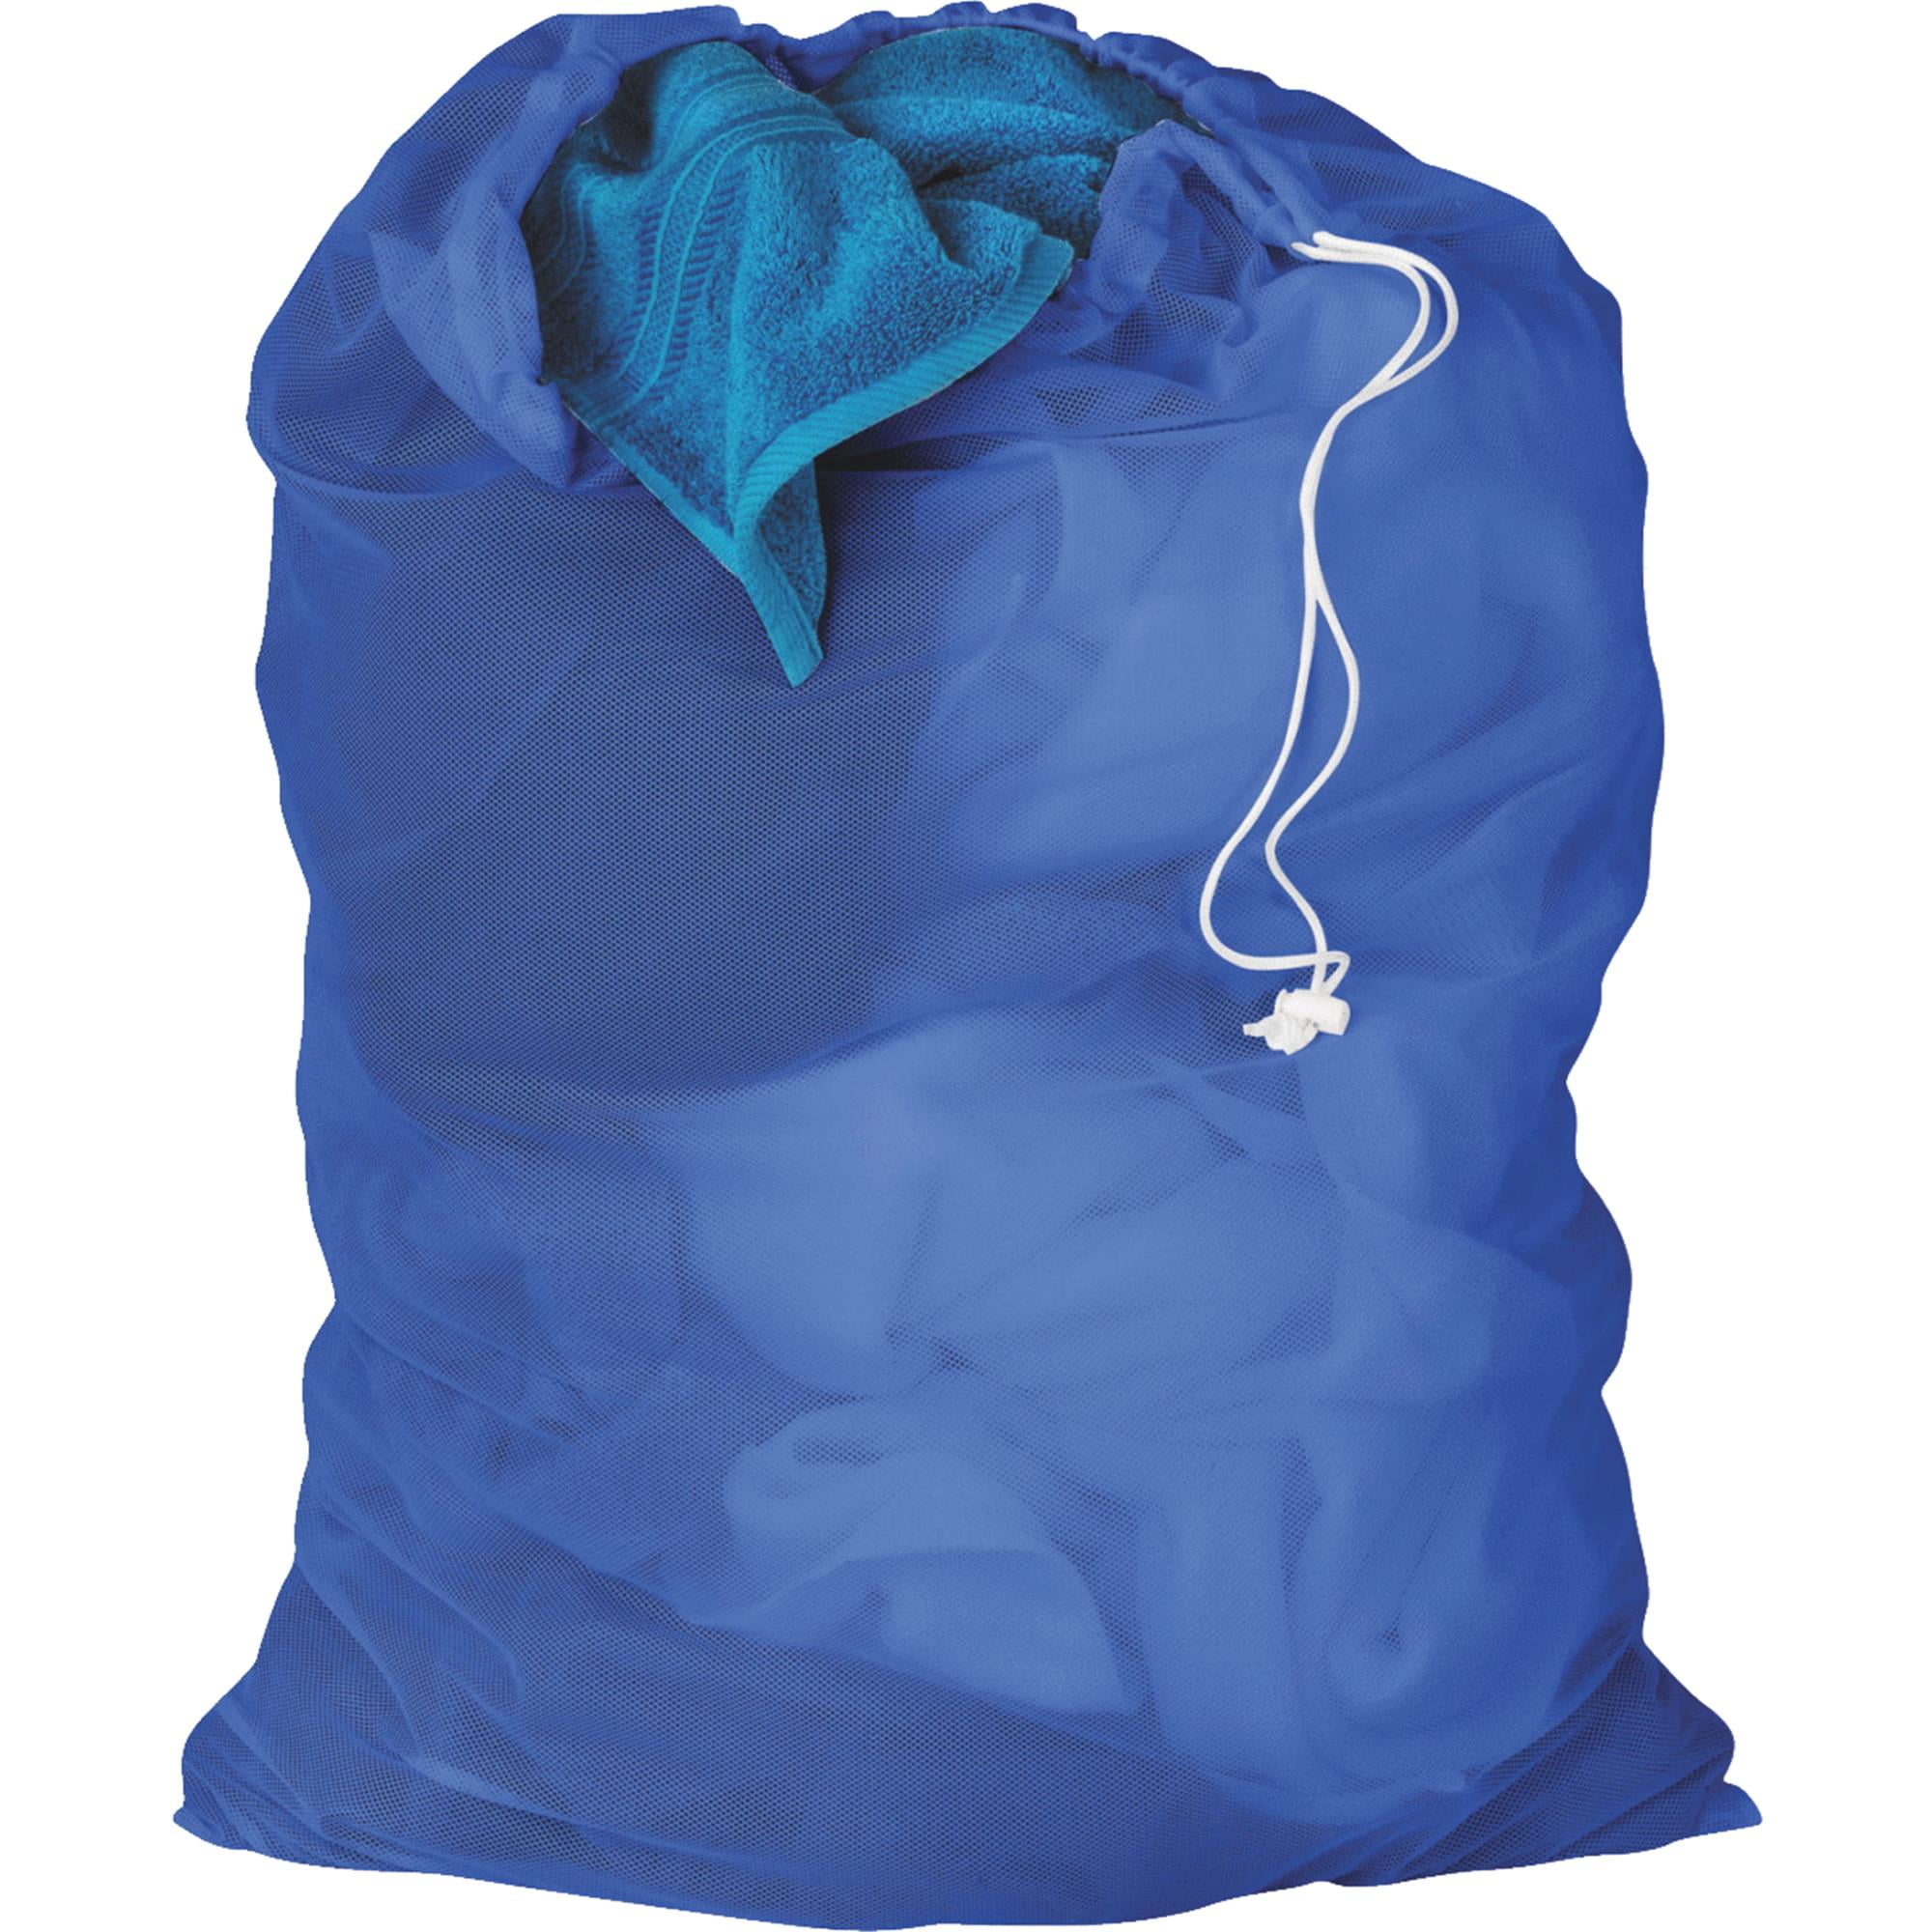 College Mesh Laundry Bag Laundromat Dorm EXTRA LARGE 24 x 36 ASSORTED COLOR. 